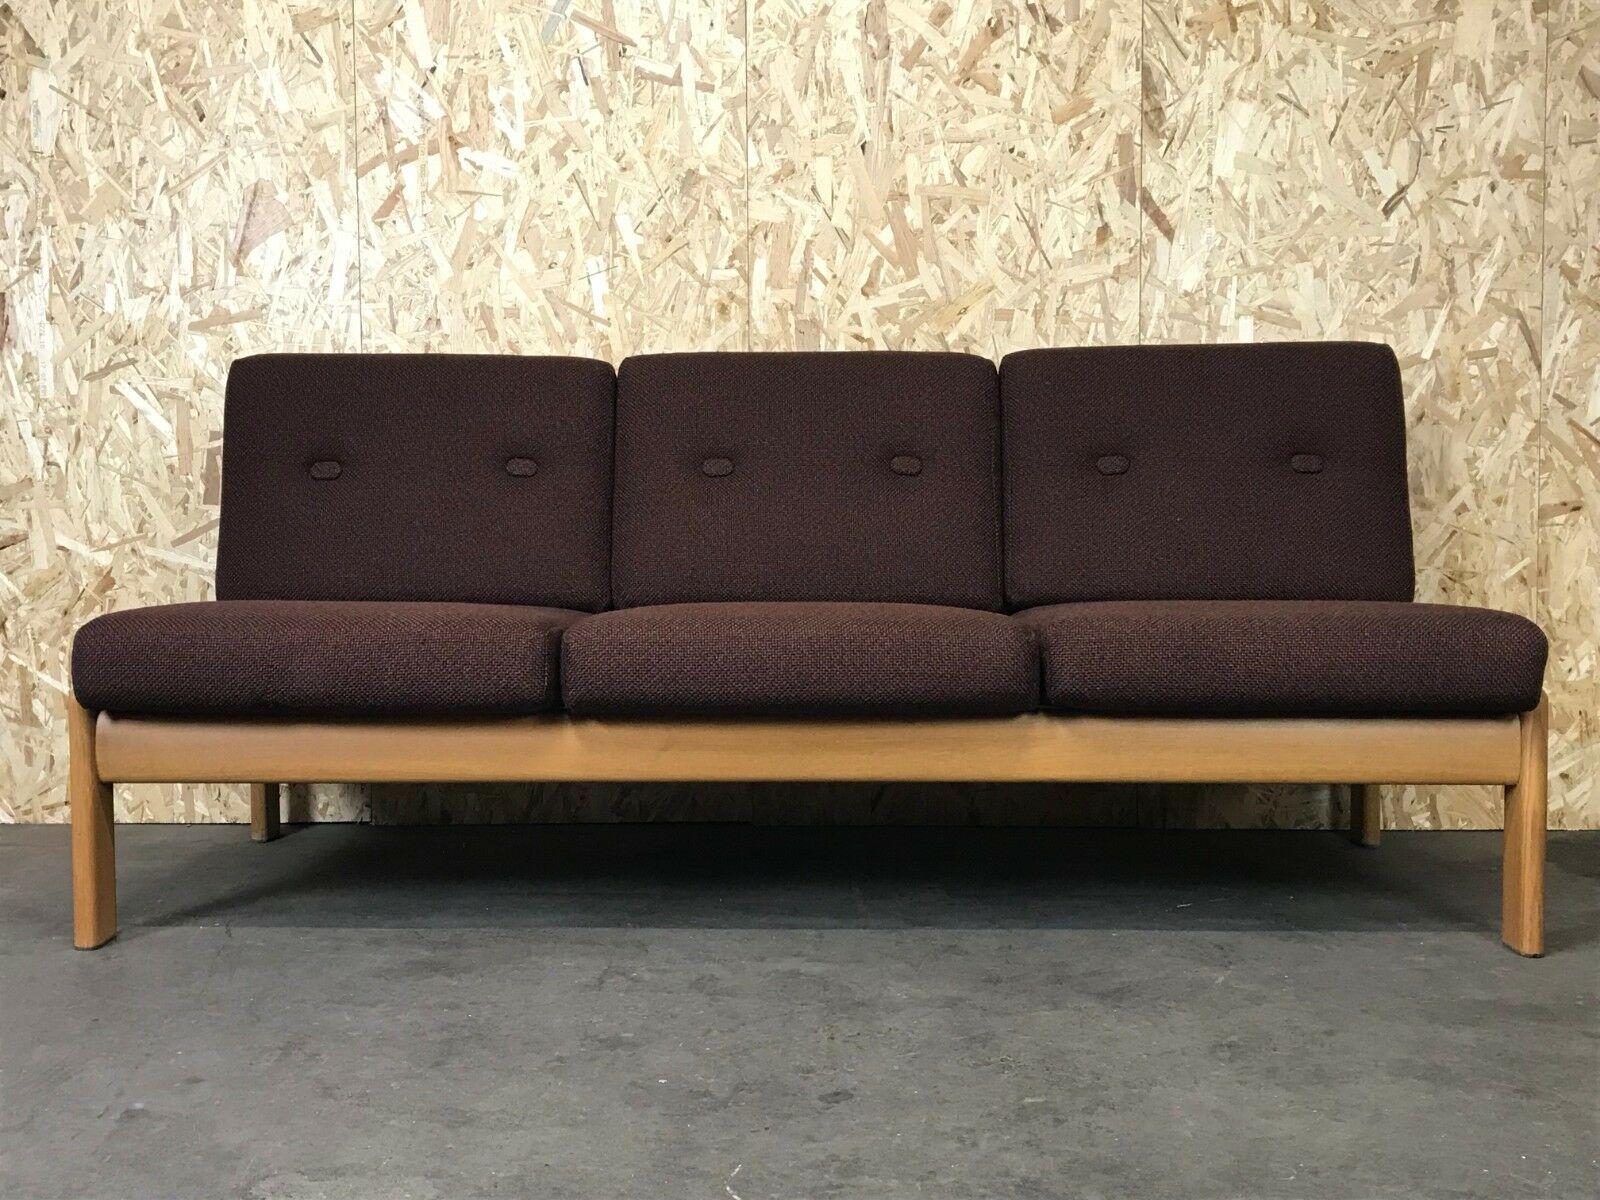 60s 70s Sofa Daybed Oak Sofa Bed Danish Design Denmark Mid Century 60s

Object: sofa

Manufacturer:

Condition: good

Age: around 1960-1970

Dimensions:

177cm x 78cm x 78cm
Seat height = 40cm

Other notes:

The pictures serve as